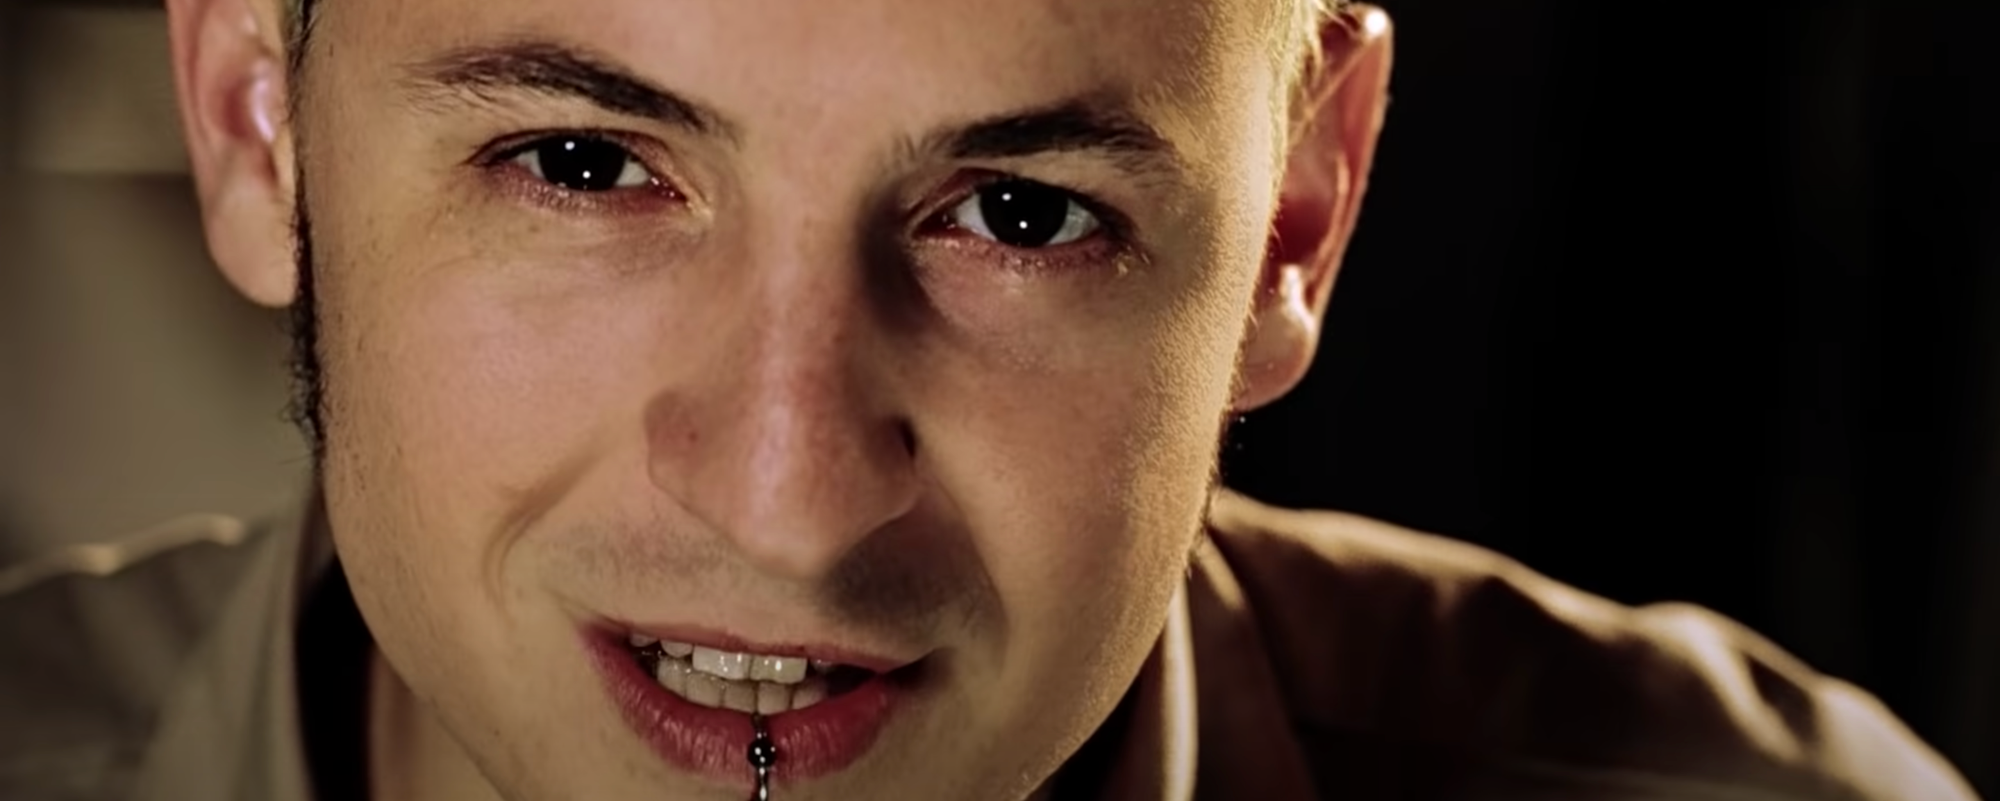 It’s Been 5 Years Without Chester Bennington— Here Are 5 of His Best Songs